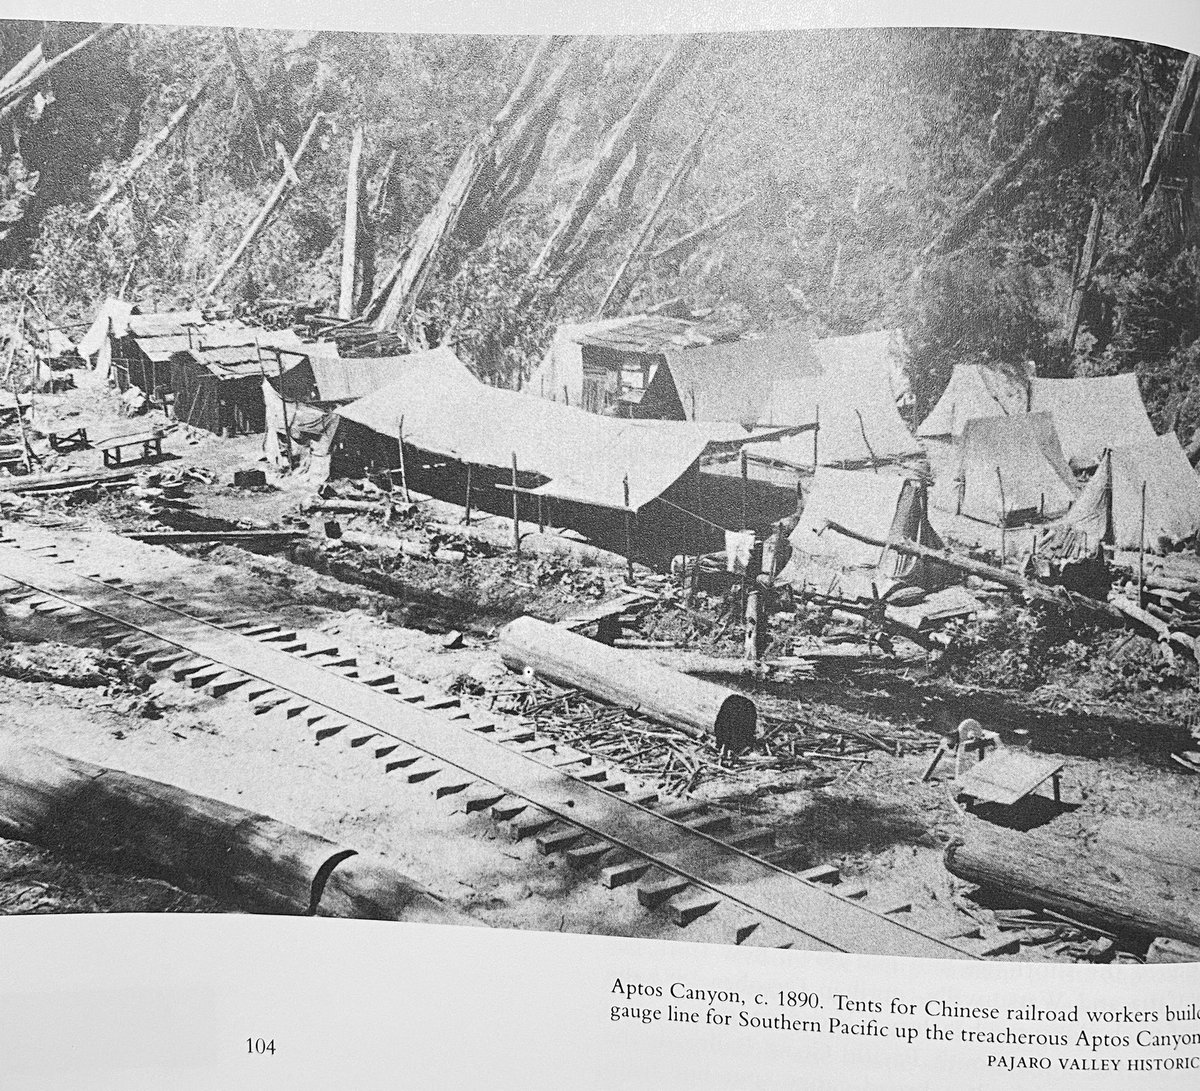 The Southern Pacific Railroad built a broad-gauge spurline from Aptos into the Aptos canyon to tap one of the largest stands of old-growth redwood timber still standing in Santa Cruz County (*today Forest of Nisene Marks). As always, the railroad relied on Chinese labor.” p. 103.